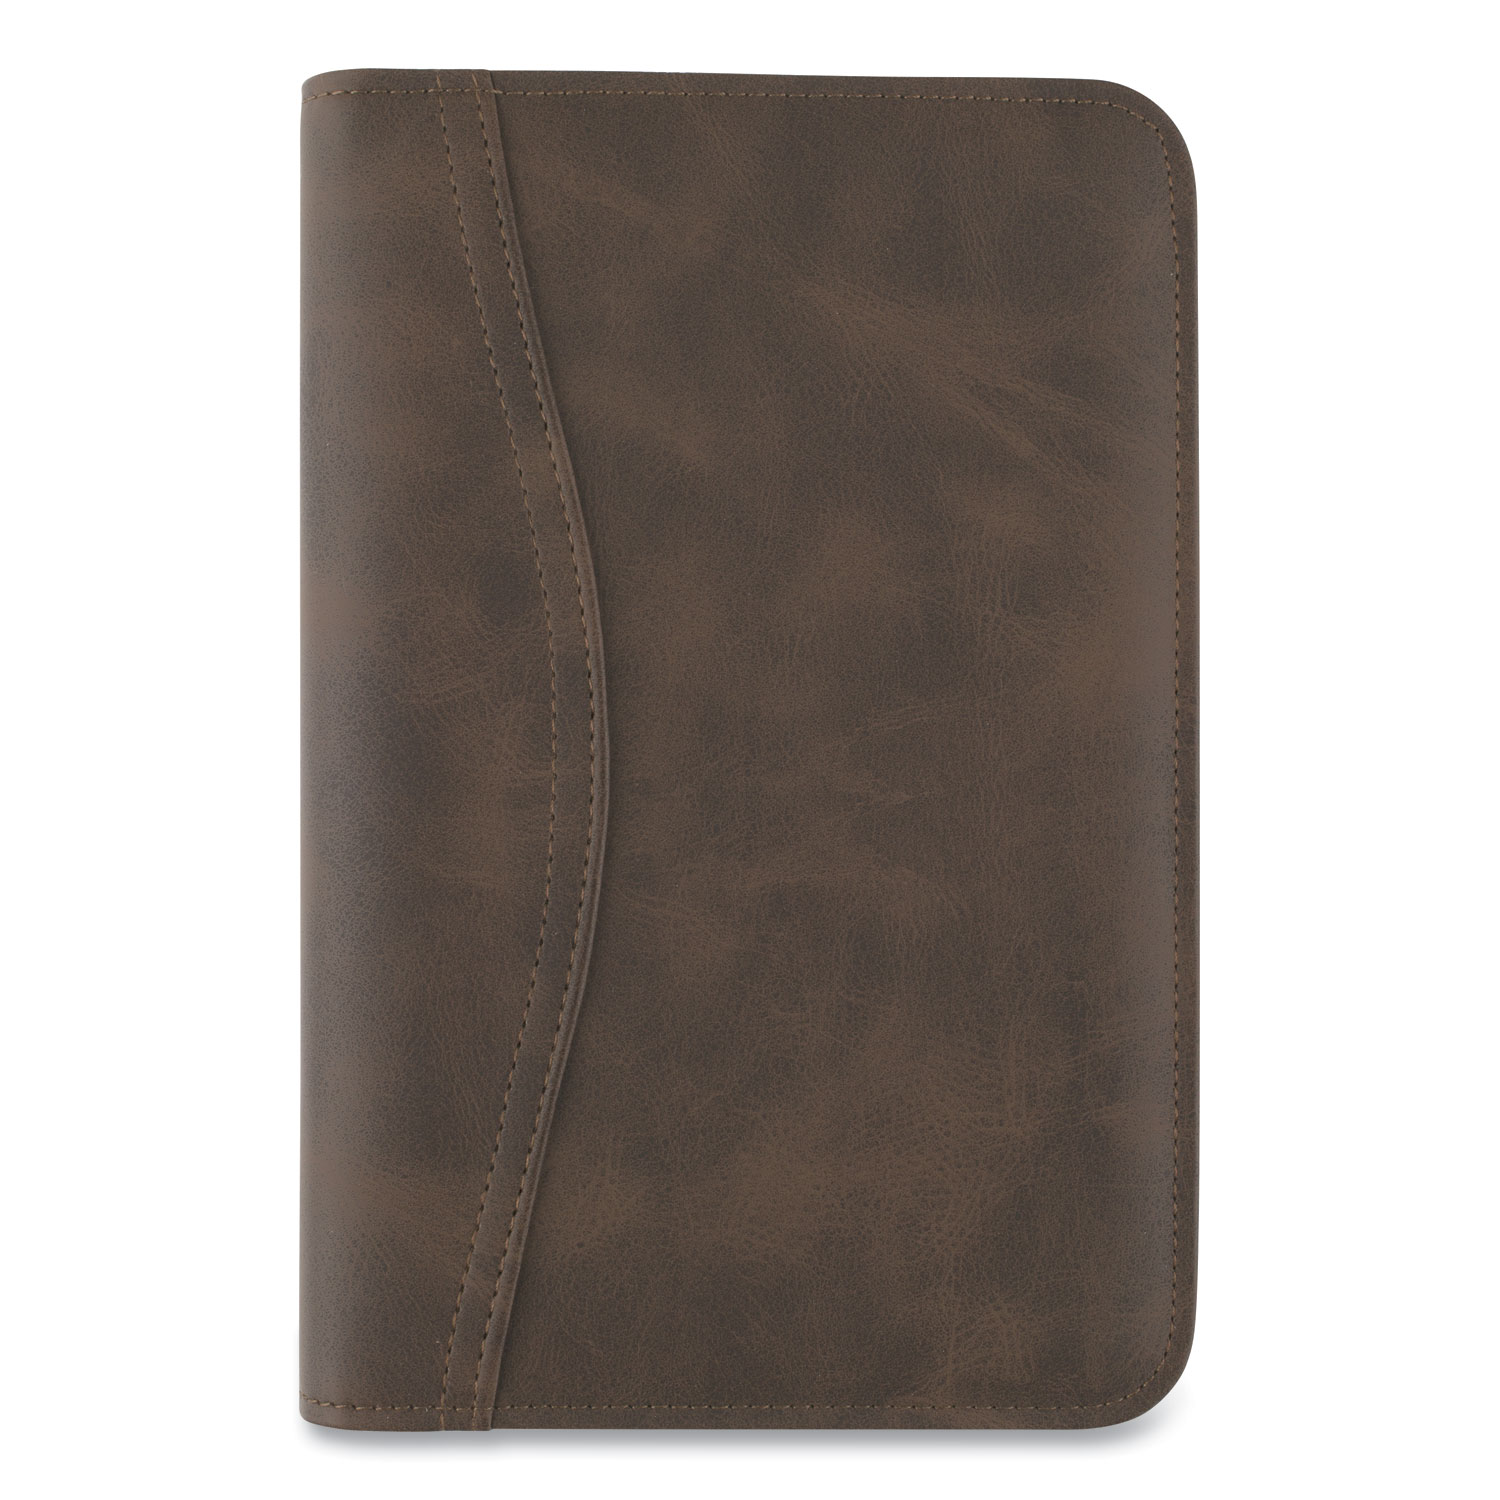 AT-A-GLANCE® Distressed Brown Leather Starter Set, 6.75 x 3.75, Brown